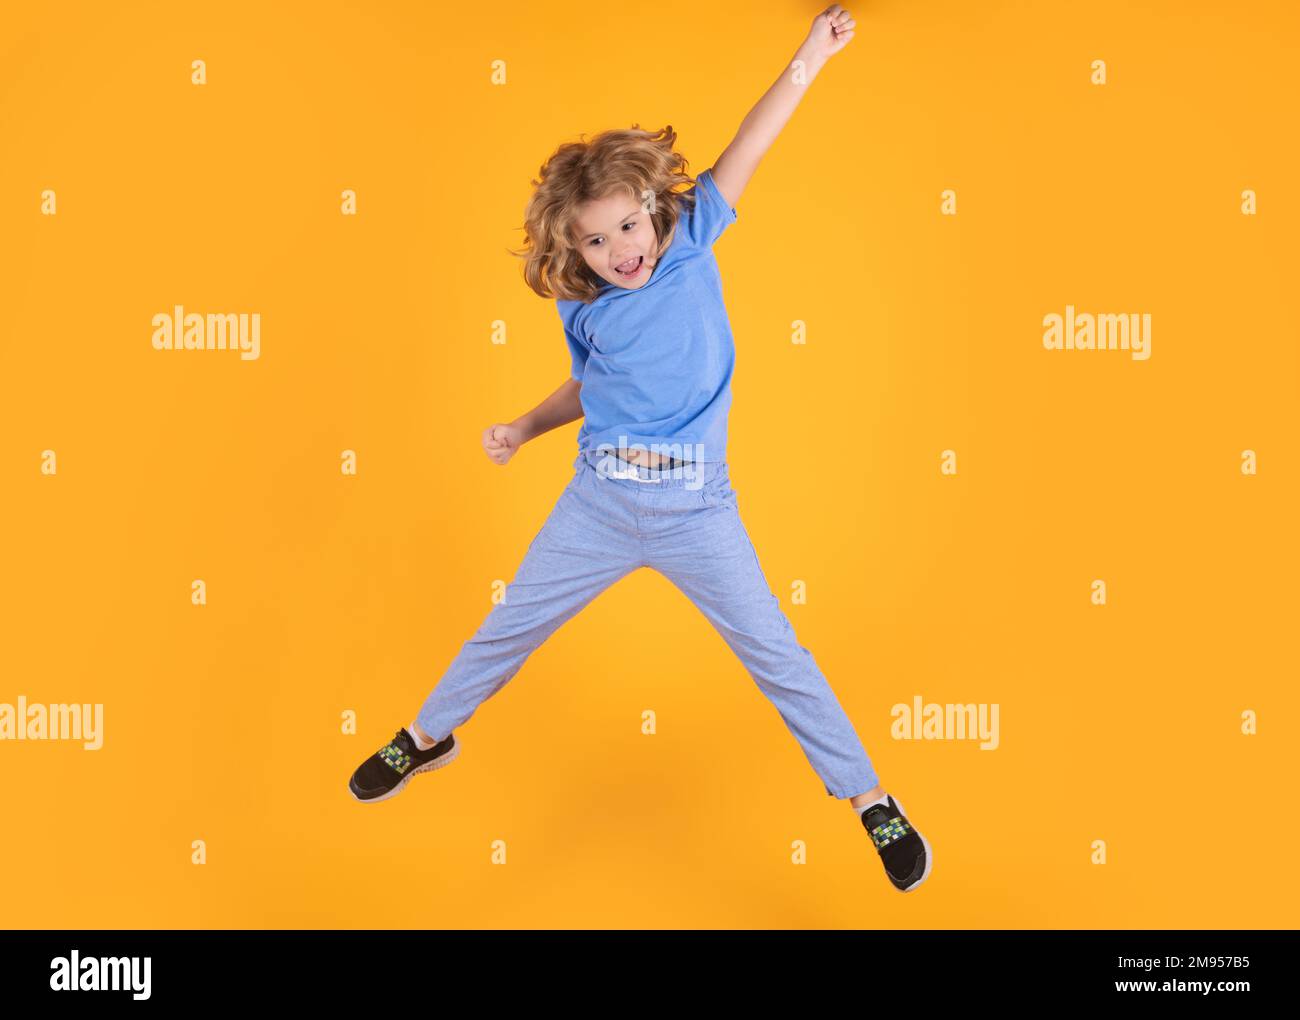 Full body of little child jump wear casual t-shirt and jeans isolated on yellow background. Stock Photo